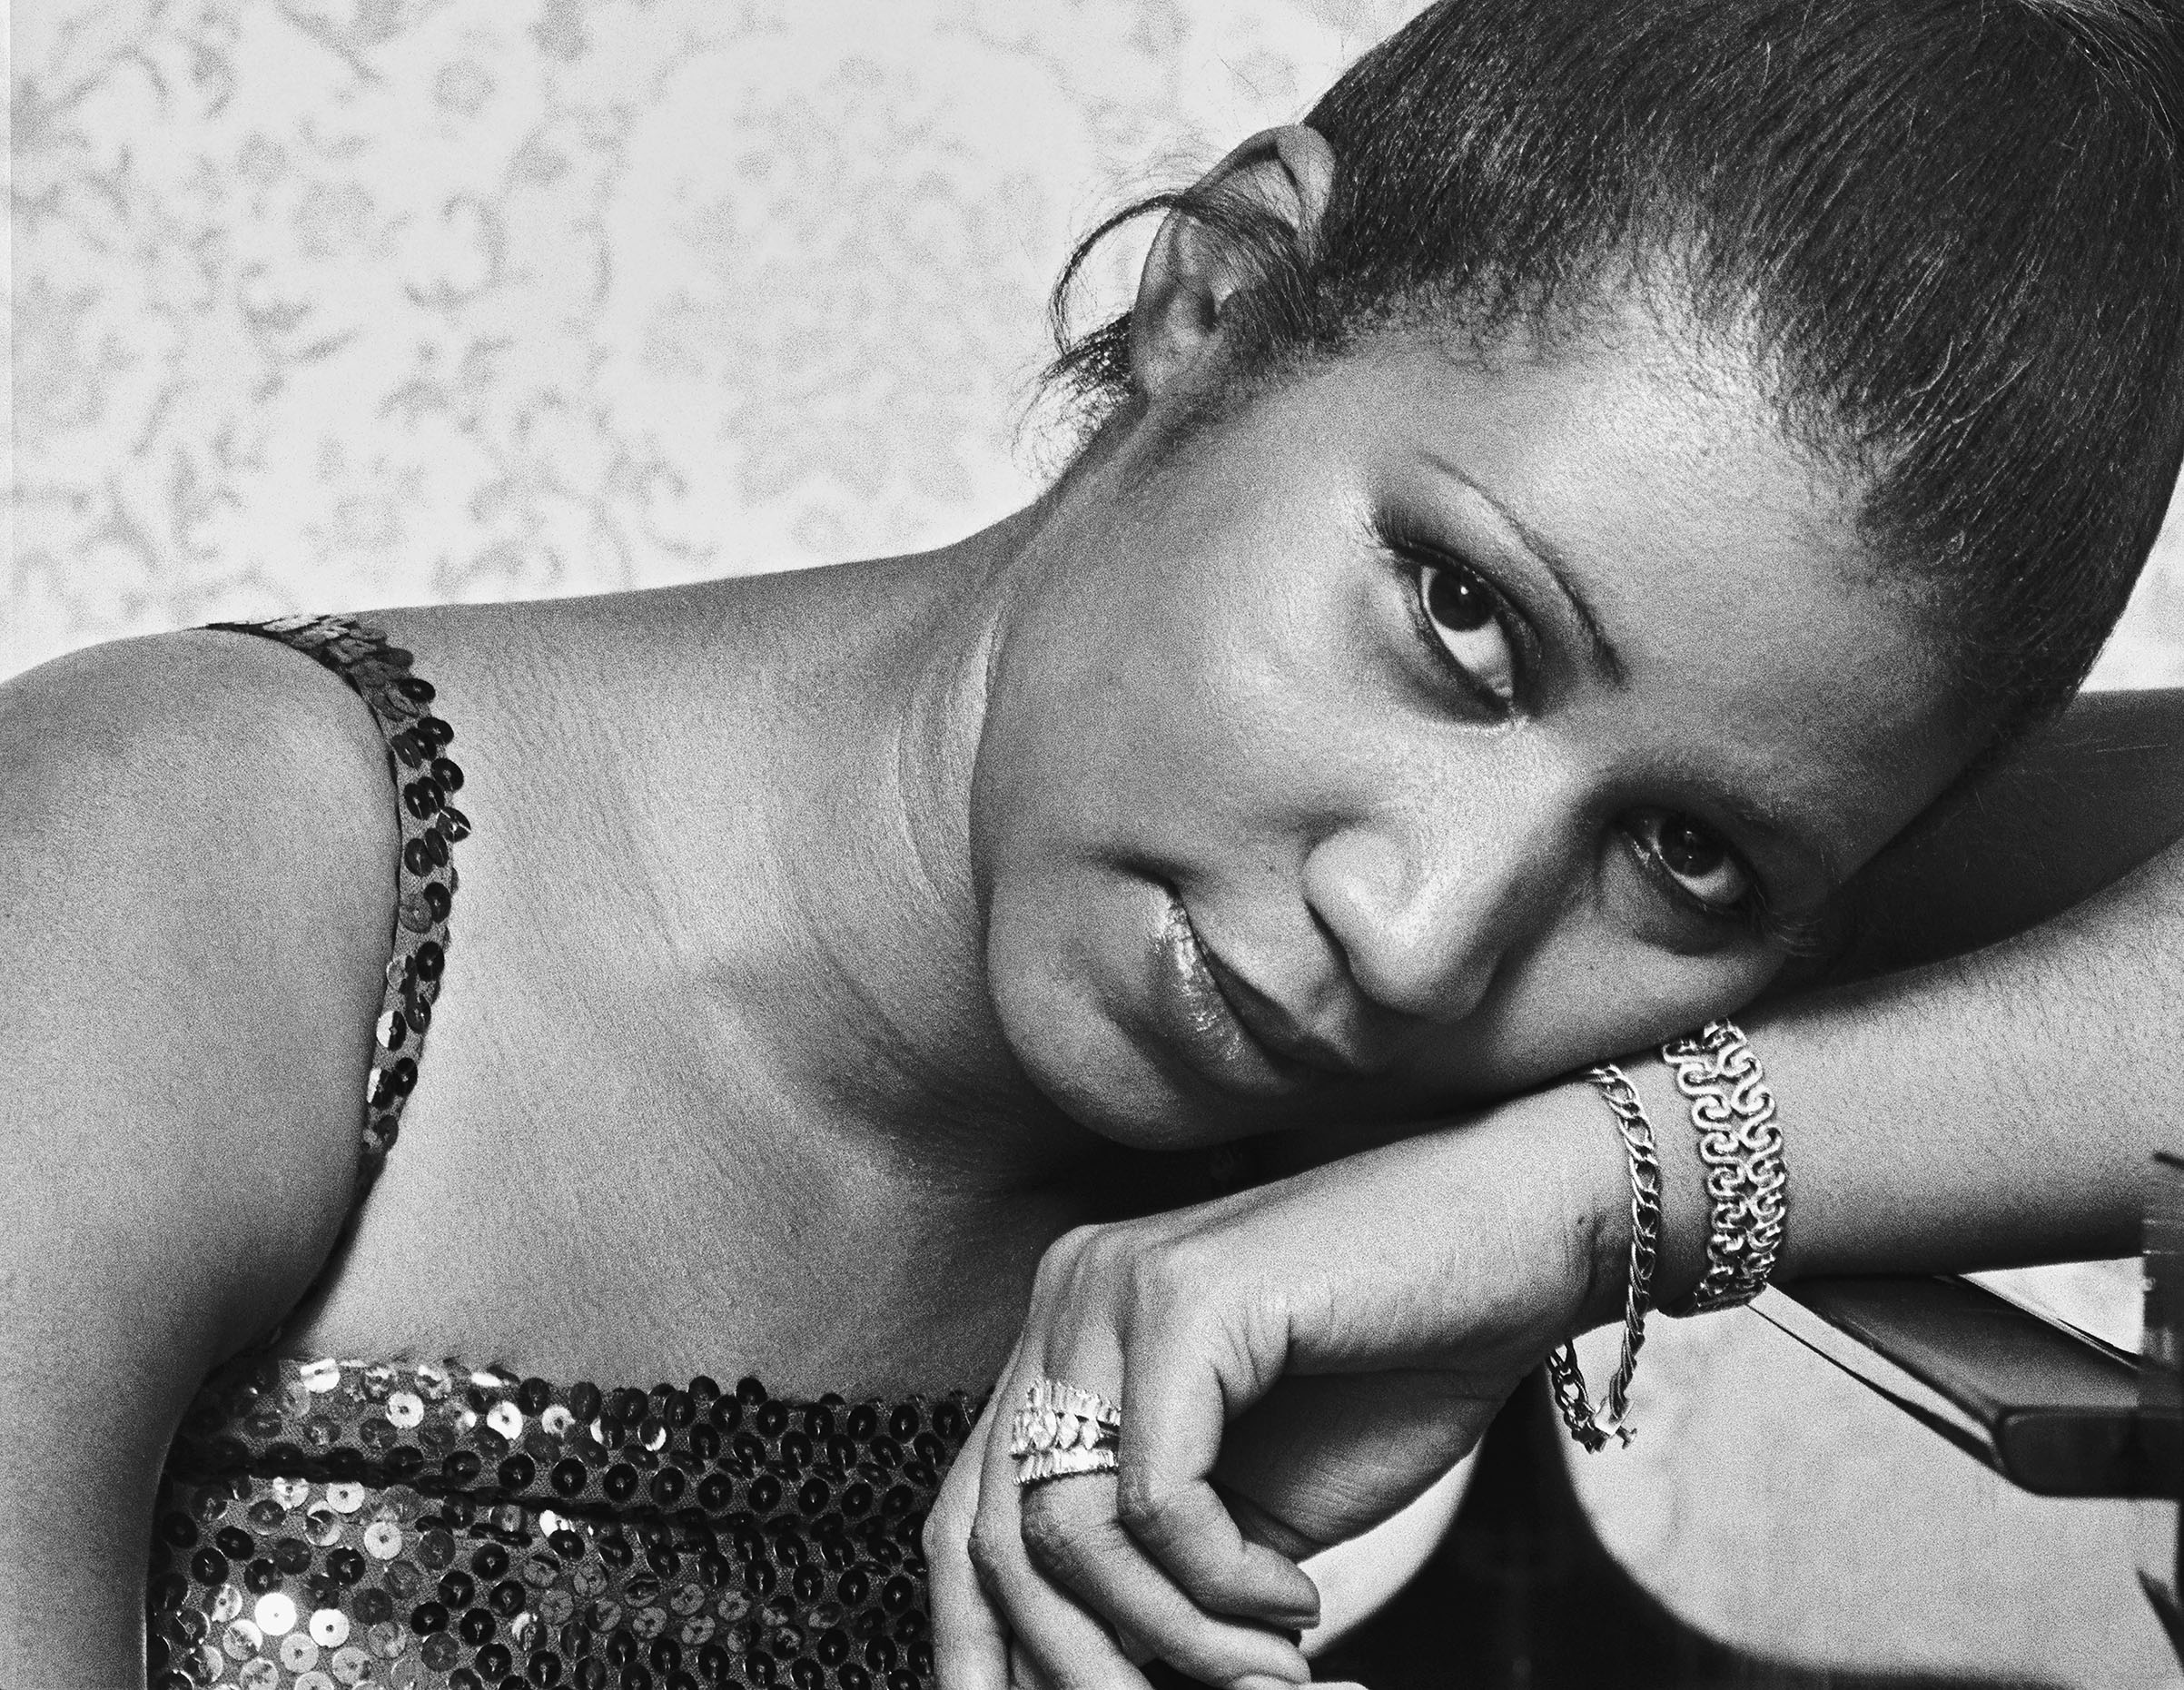 Singer Aretha Franklin, photographed at her Los Angeles home in 1977. (Bruce W. Talamon—Courtesy of TASCHEN)